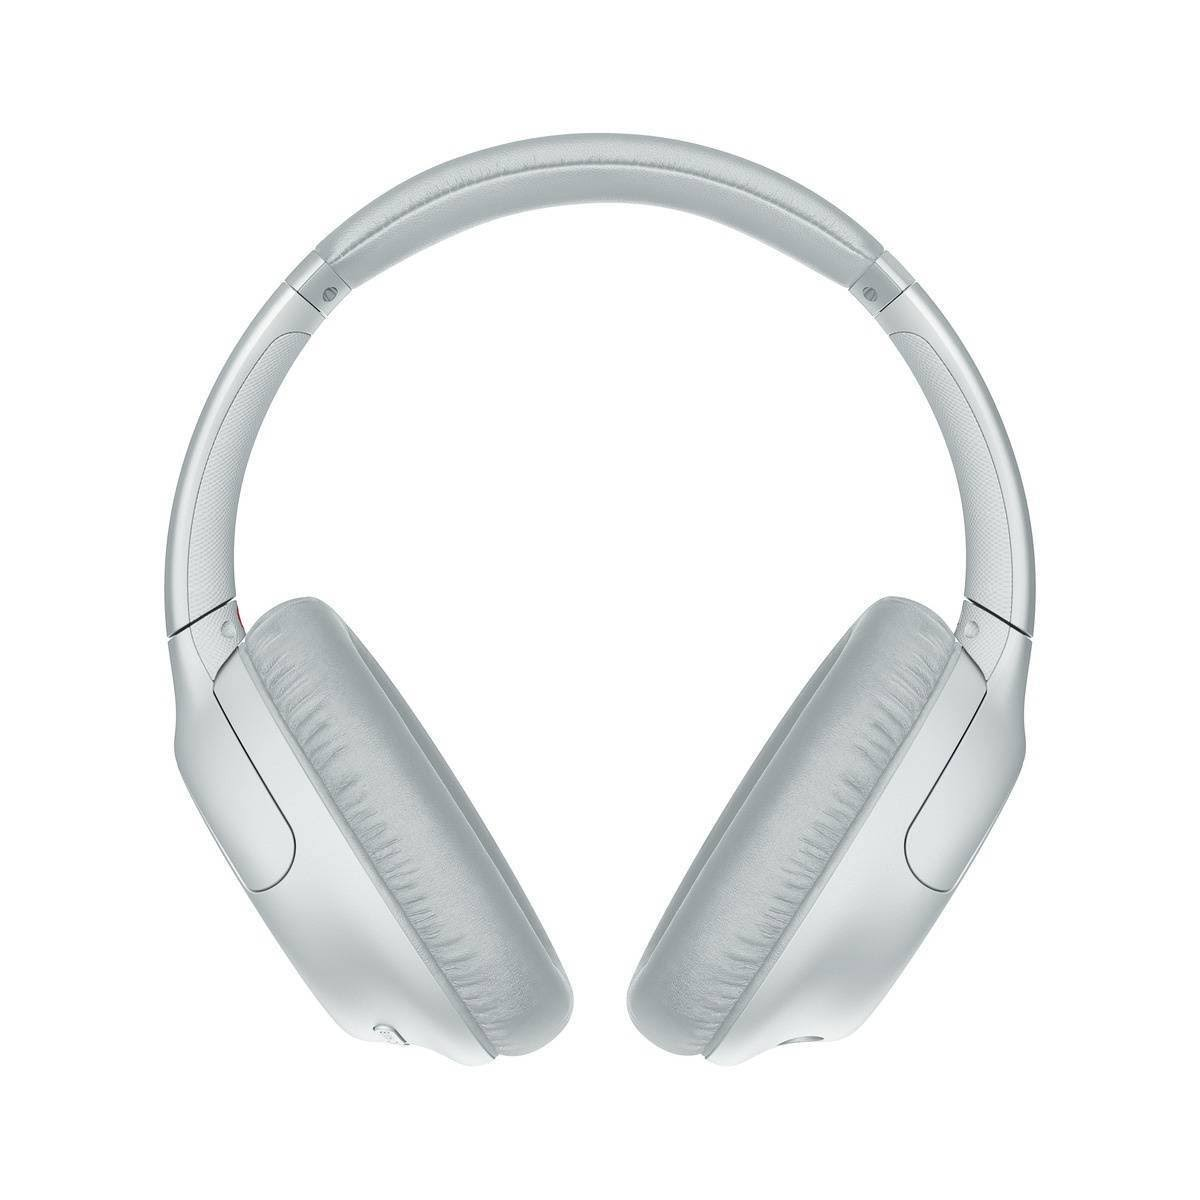 Sony WH-CH710N Noise-Canceling Wireless Over-Ear Headphones, White